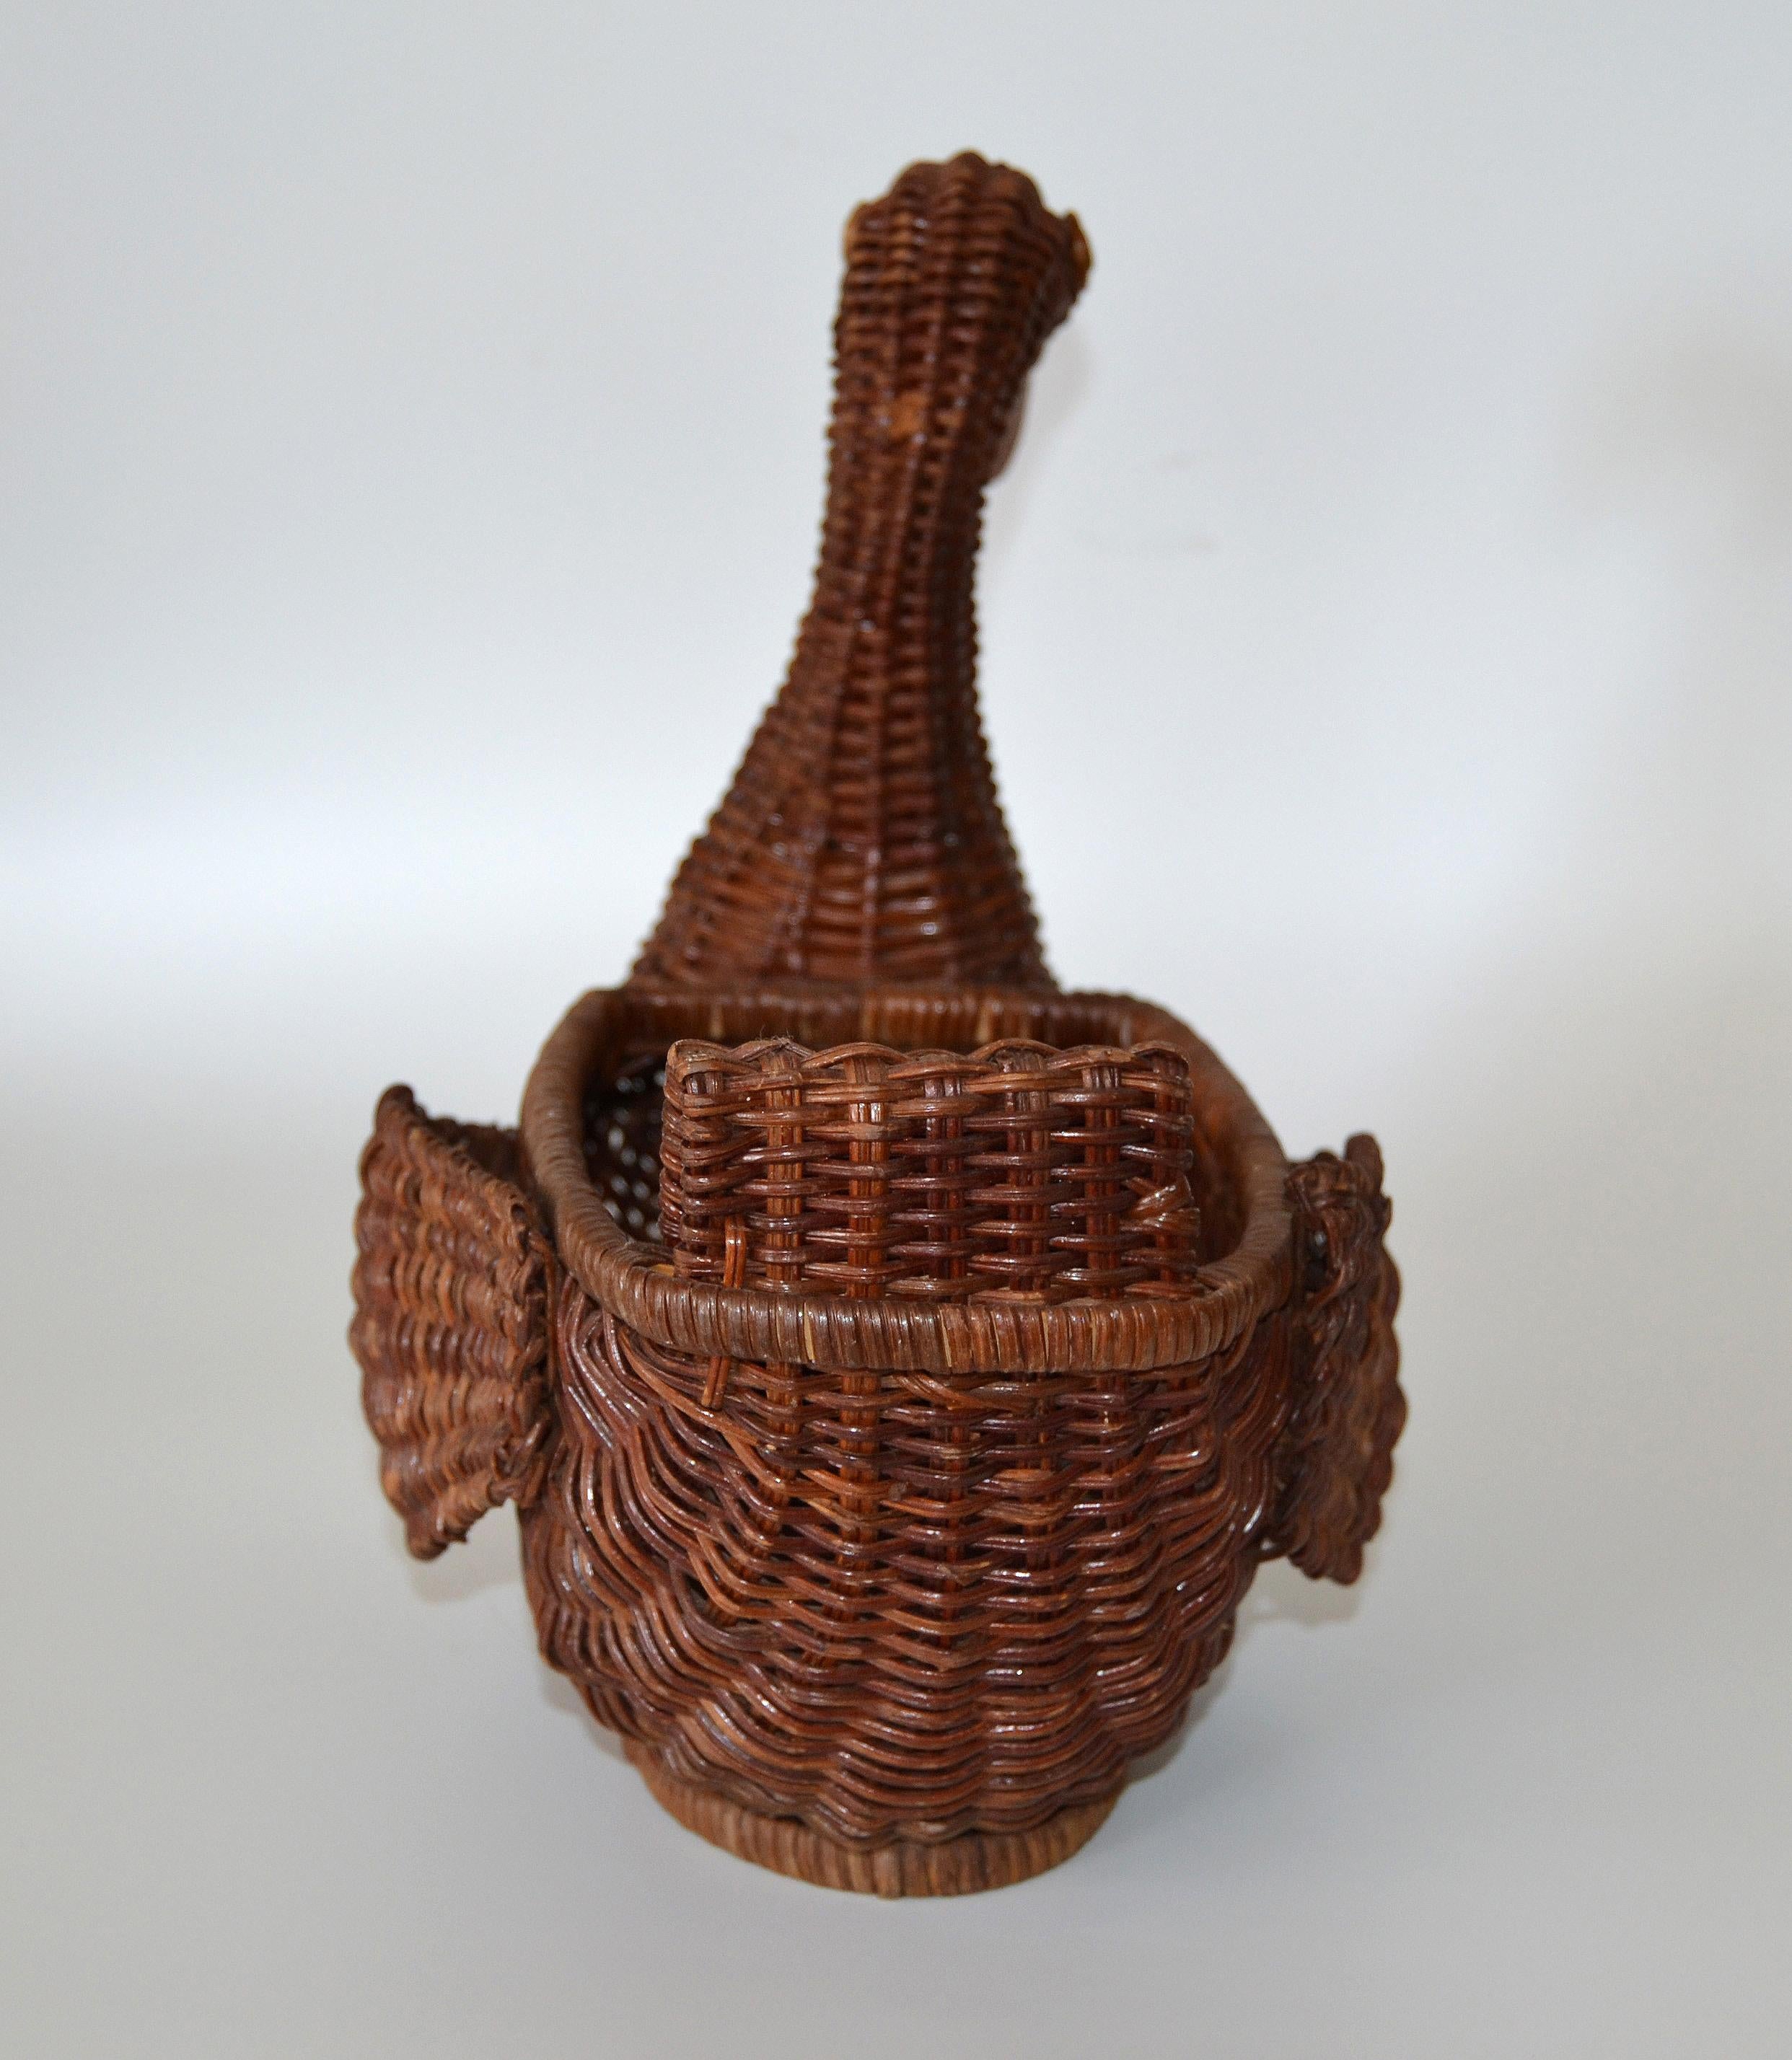 Boho Chic Decorative Handcrafted Woven Reed Brown Duck Basket, Animal Sculpture  3